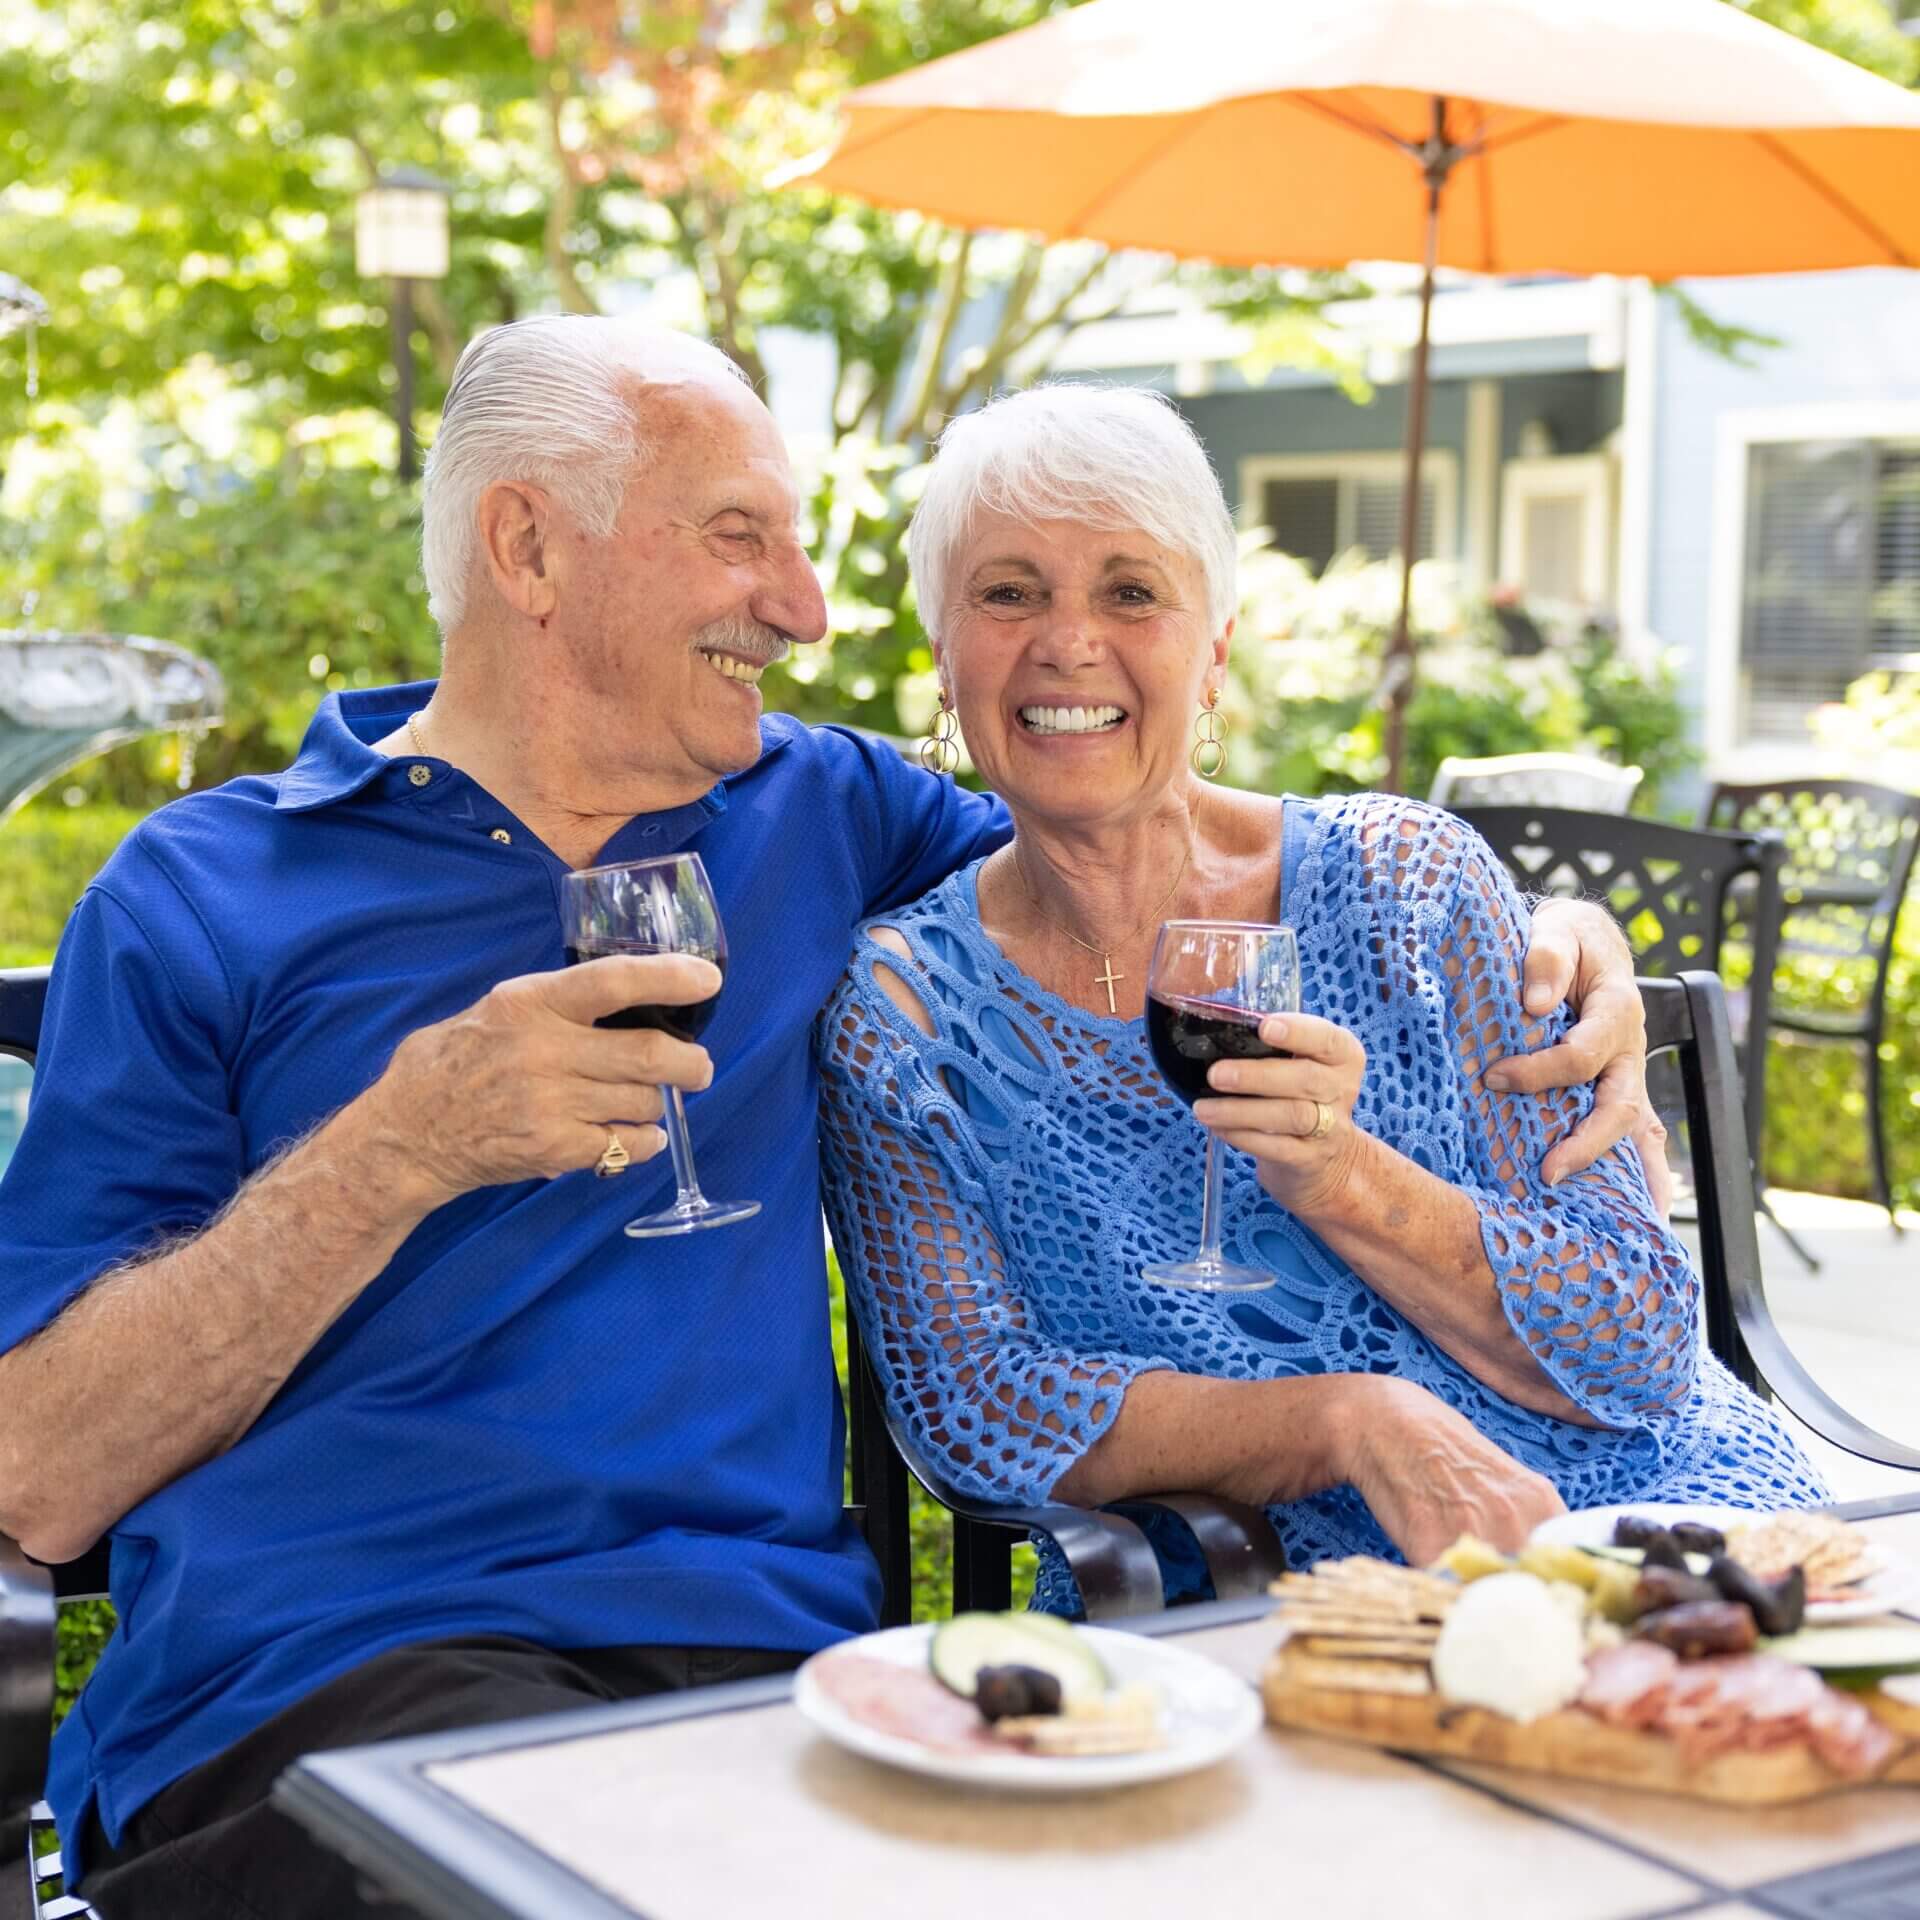 Will I Lose My Independence When Moving Into A Senior Living Community